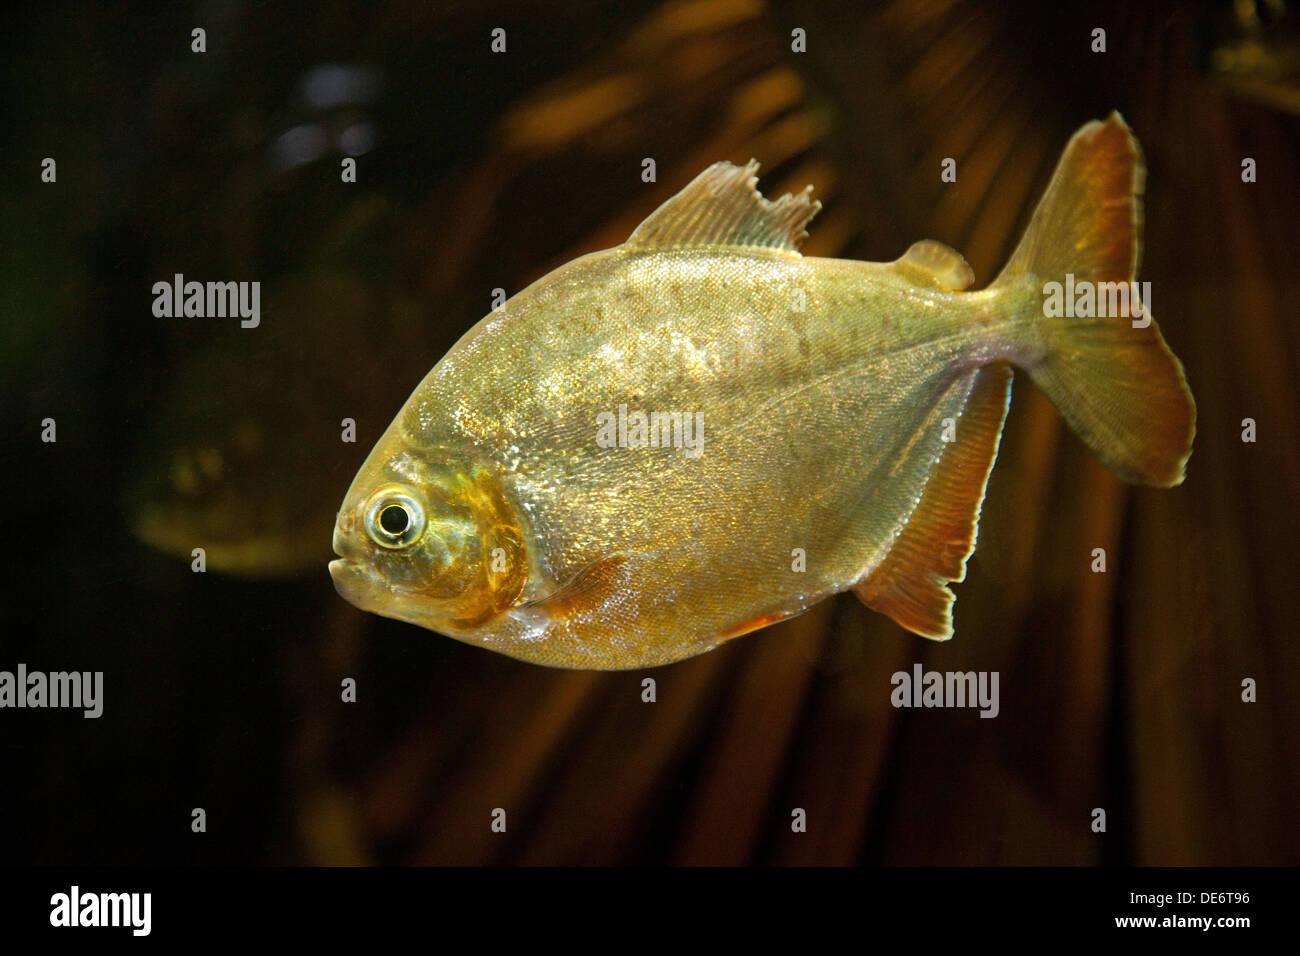 Lobe Toothed Piranha fish, - Pygopristis denticulata,  from the Lower Amazon, South America Stock Photo